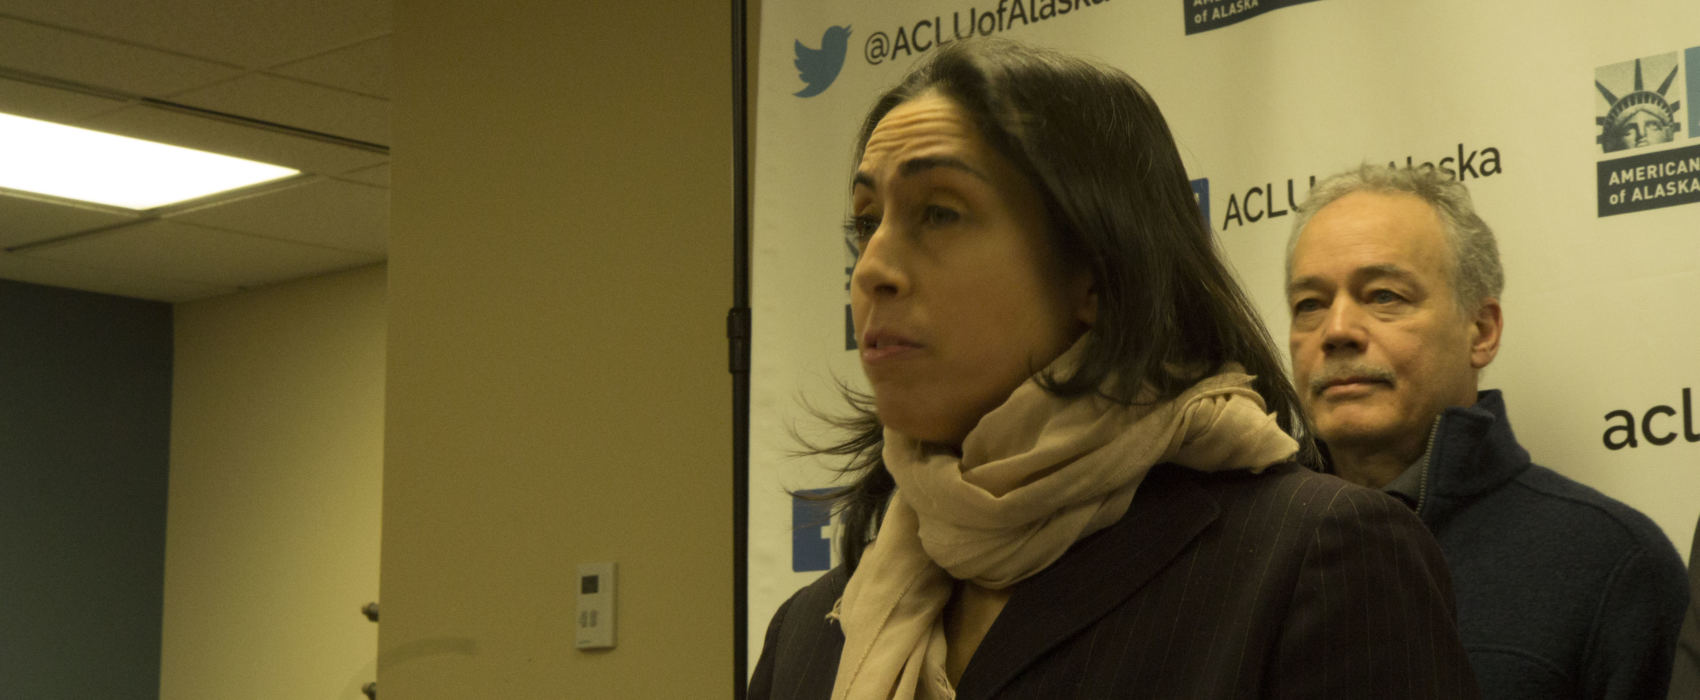 Former Assistant Attorney General Libby Bakalar speaking at a press conference on Jan. 10, 2019. Bakalar is one of three plaintiffs in a lawsuit filed by the ACLU of Alaska against the Dunleavy administration, claiming that she was illegally terminated by the governor. (Photo by Wesley Early, Alaska Public Media)